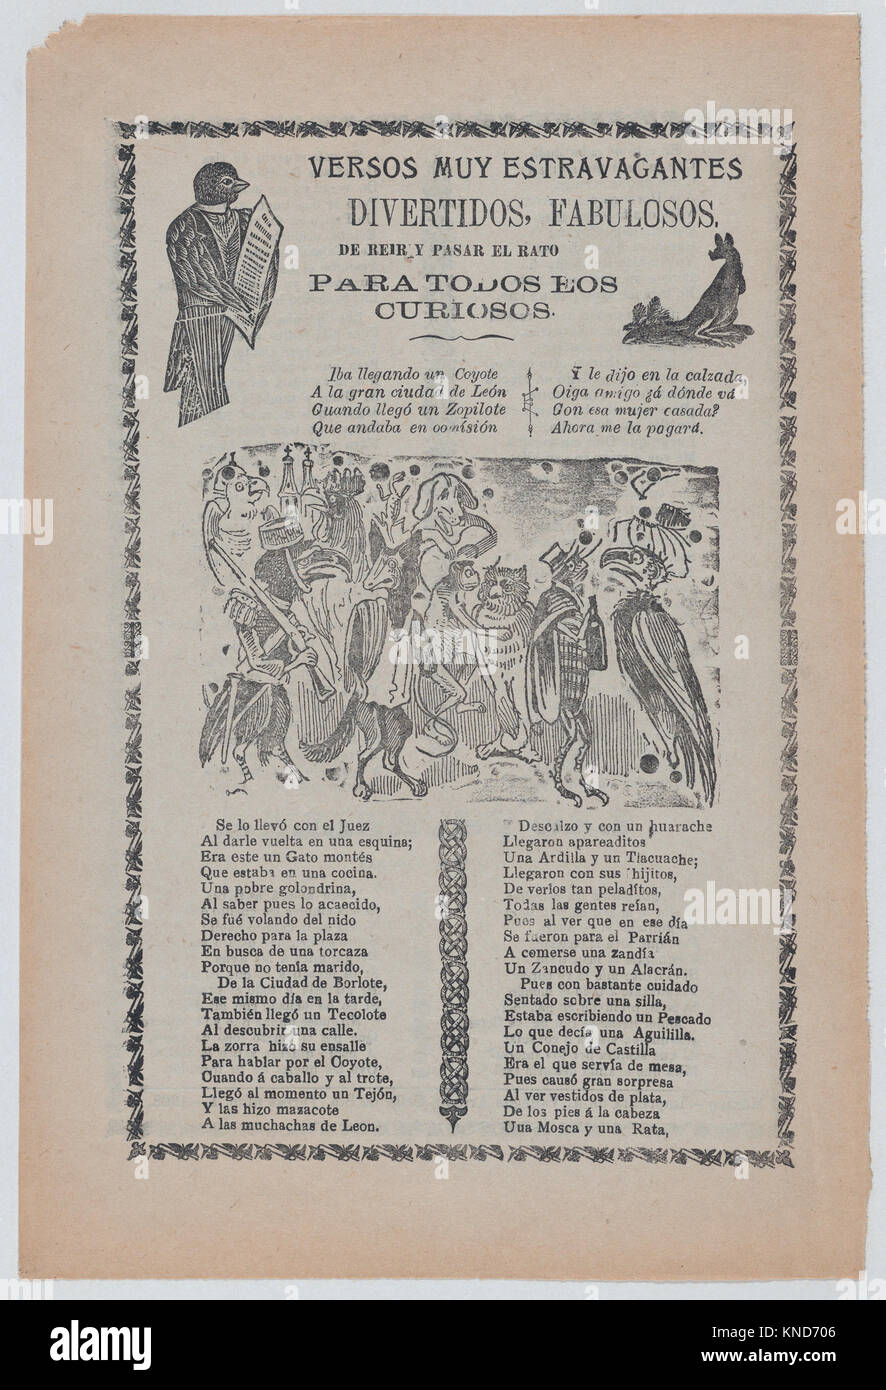 Broadsheet with comic verses, a group of animals wearing human clothes and playing music MET DP868505 736893 Artist: Jos? Guadalupe Posada, Mexican, 1851?1913, Broadsheet with comic verses, a group of animals wearing human clothes and playing music, ca. 1908, Photo-relief and letterpress on tan paper, Sheet: 12 in. ? 7 15/16 in. (30.5 ? 20.2 cm). The Metropolitan Museum of Art, New York. The Elisha Whittelsey Collection, The Elisha Whittelsey Fund, 1946 (46.46.144) Stock Photo